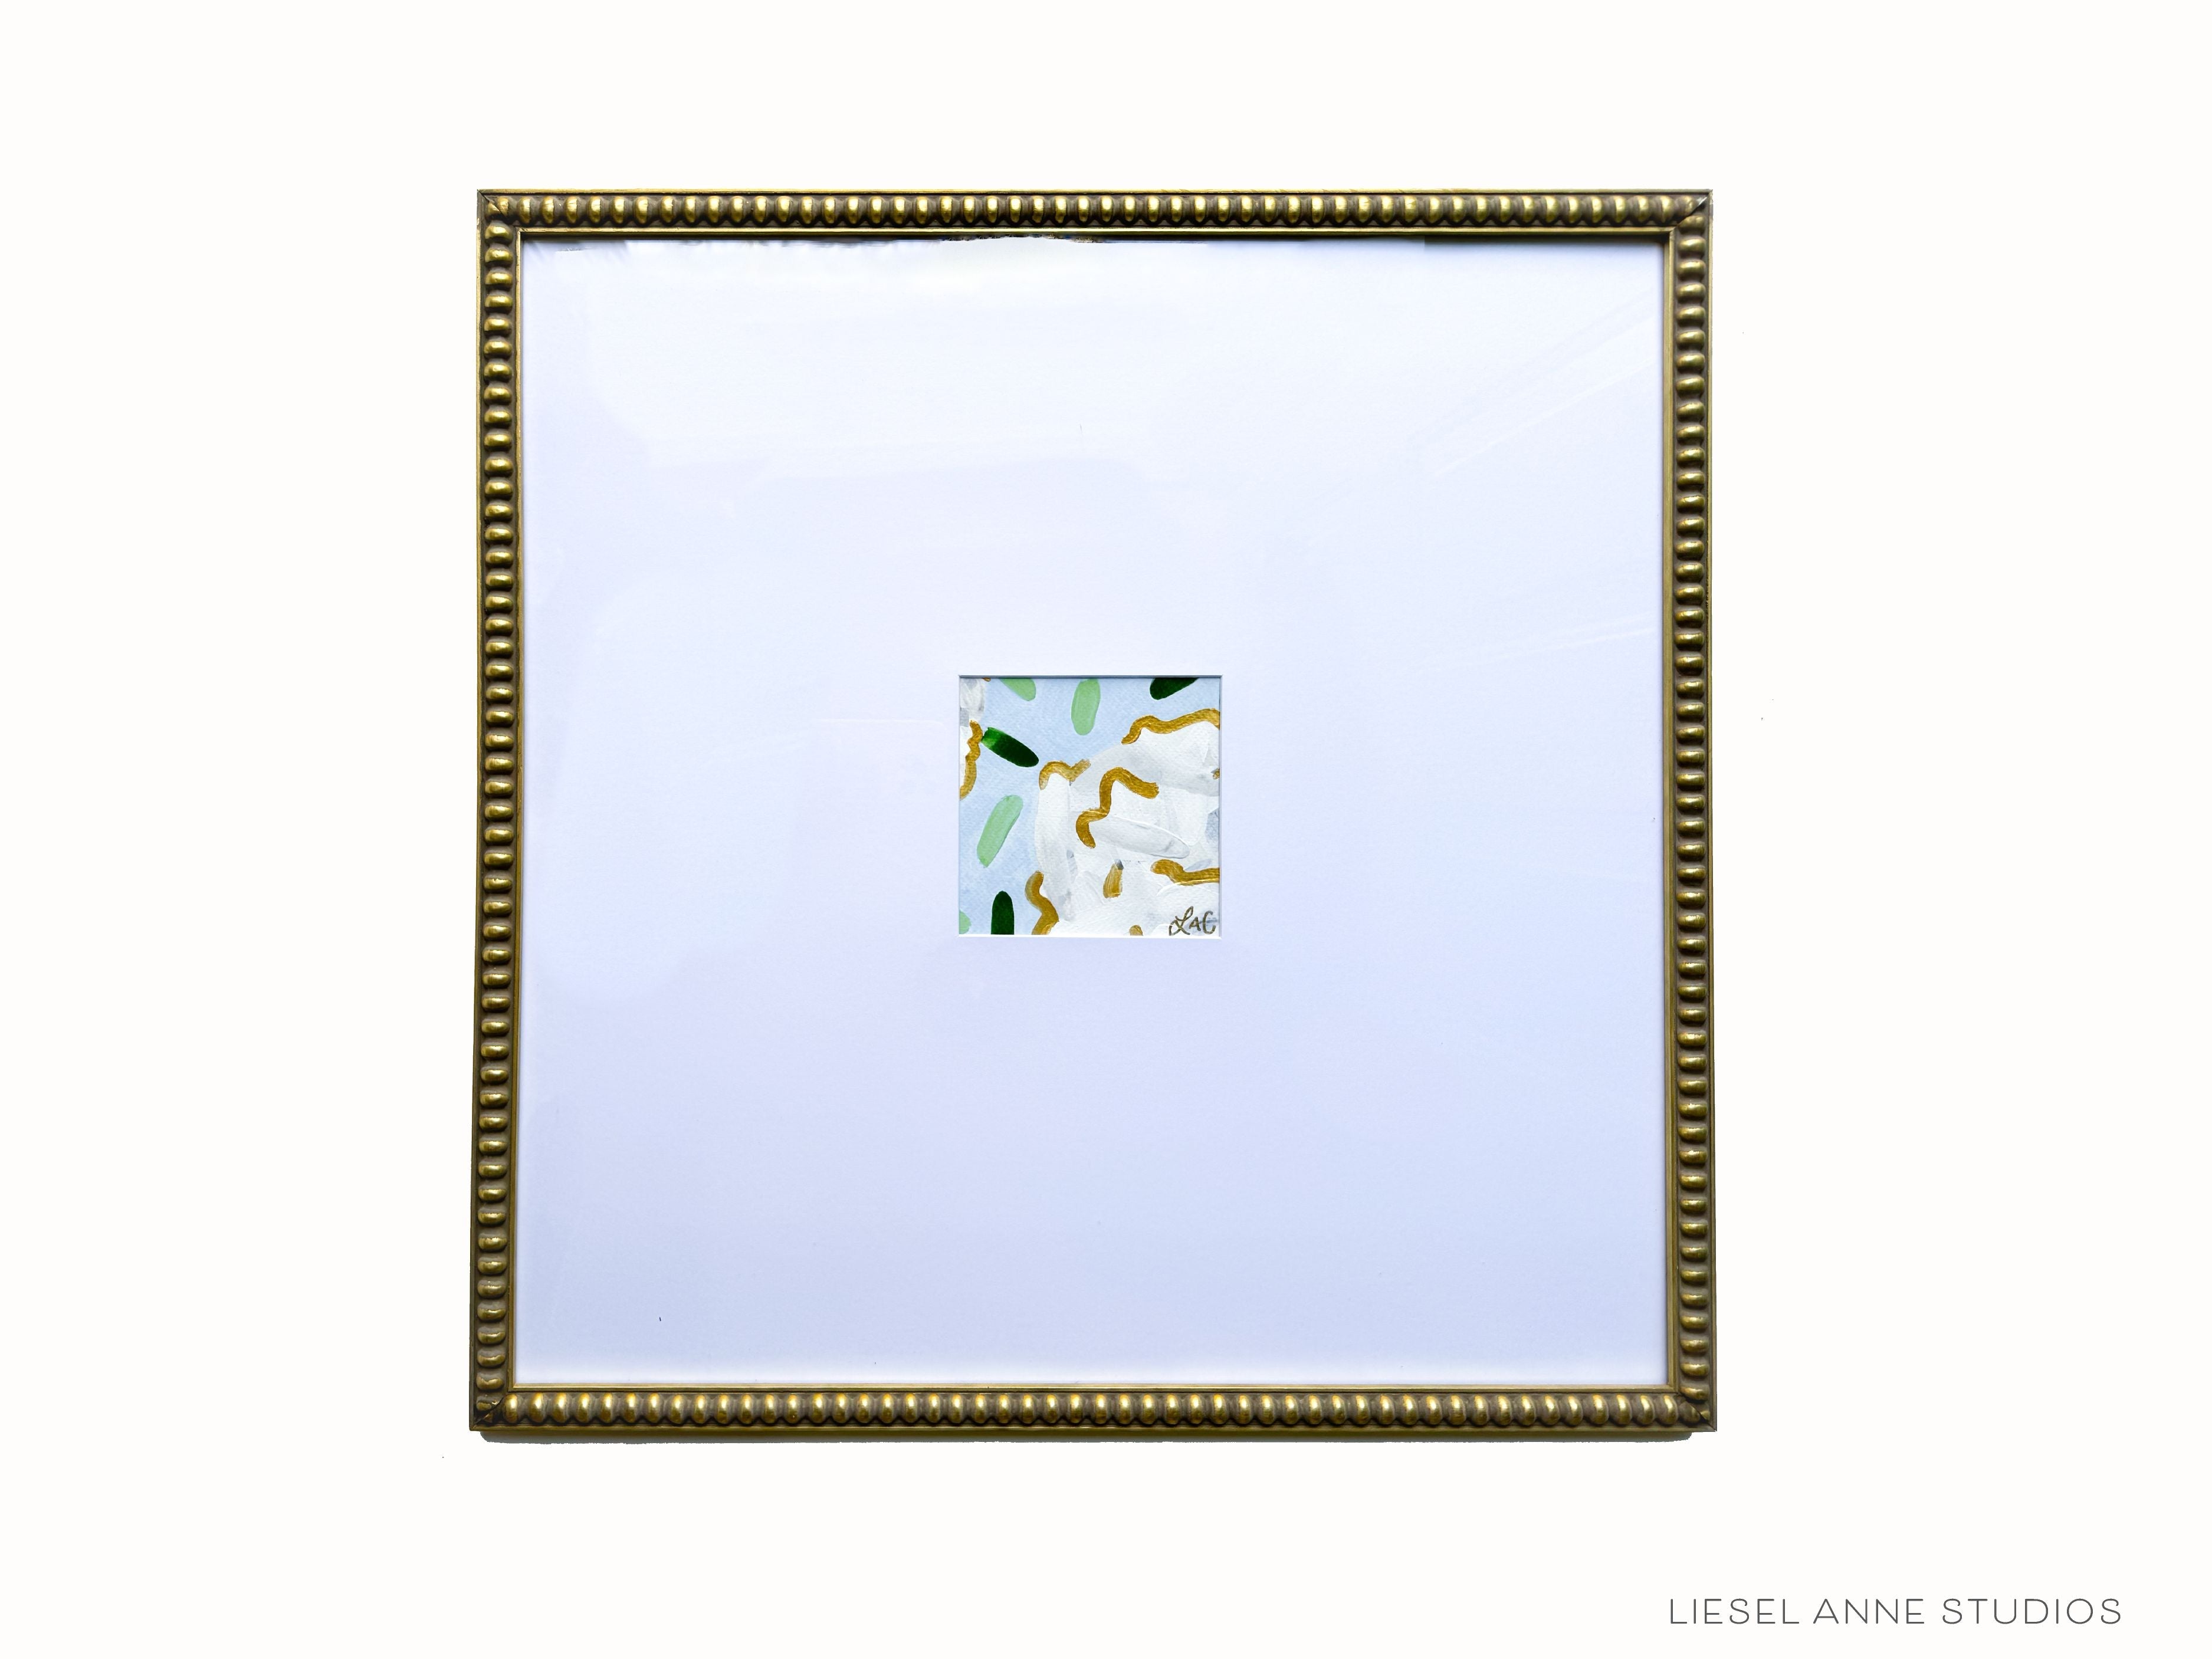 Golden Hydrangea Mini (Oversized Frame) | Blue & White XIX-Original artwork measures 5"x5" | Hand-Painted with gouache on cold press watercolor paper | Matted and framed in gold wood frame sized 20"x20" | Glare-resistant glass | Hanging hardware included | Features our signature Golden Hydrangea design with a light blue base, white hydrangeas and shimmery gold accents | Initialed in gold by the Liesel Anne (the artist) on the front and signed and dated on the back.-The Singing Little Bird